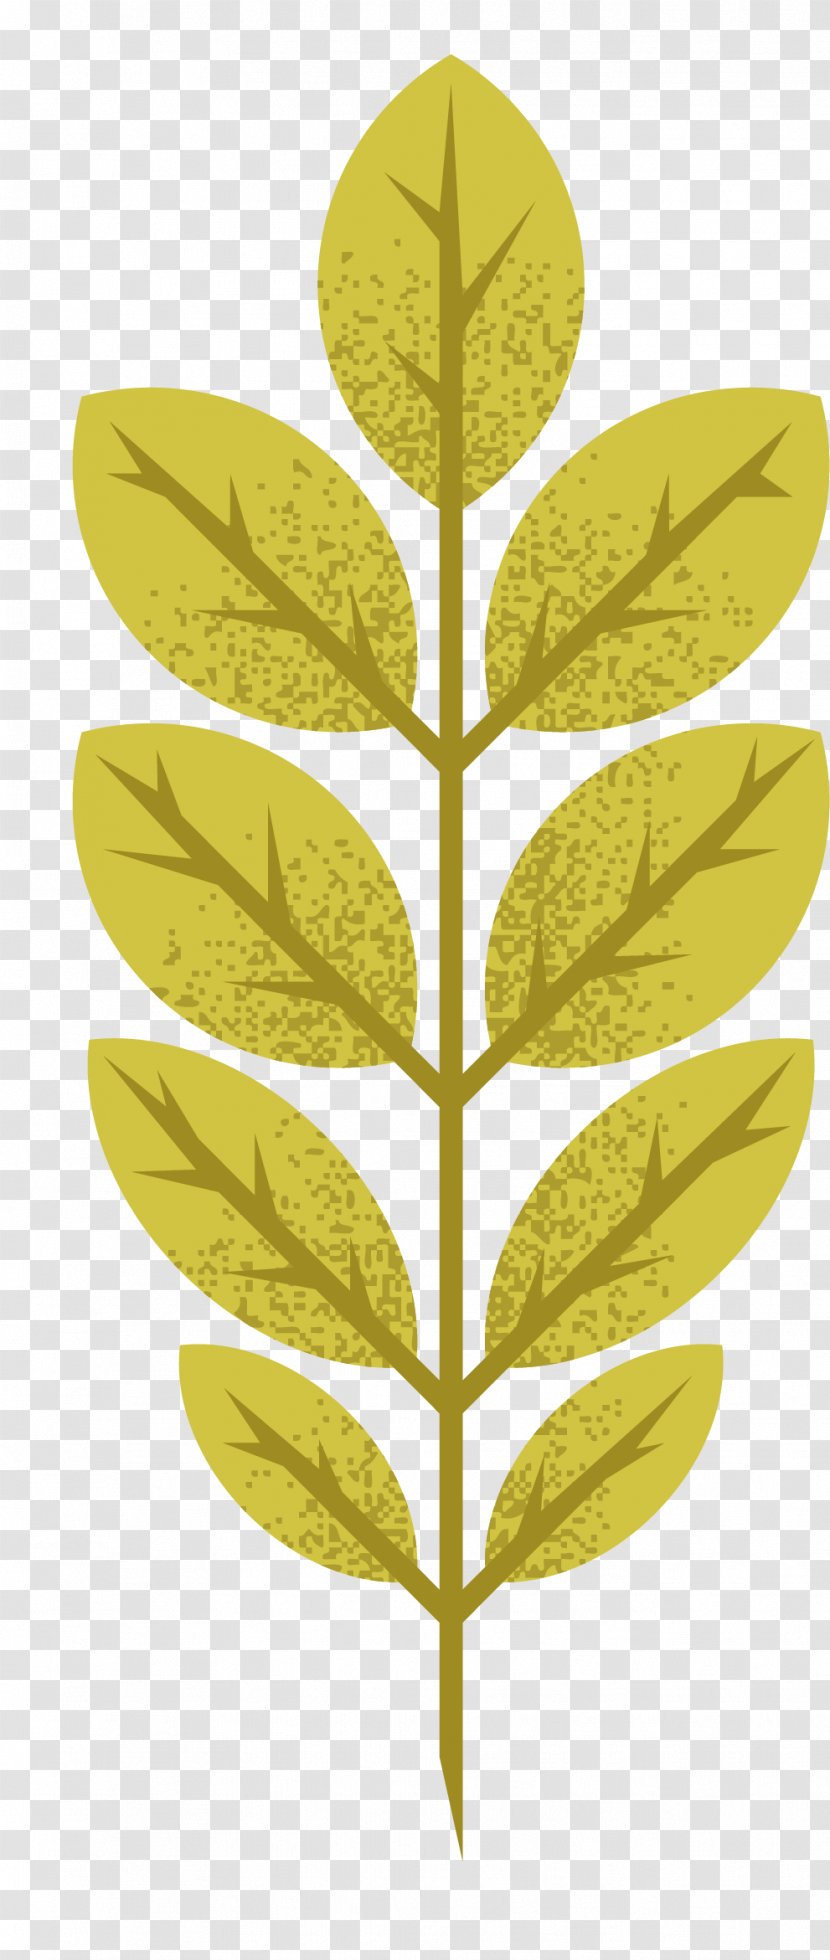 Maple Leaf Autumn - Green - Leaves Collection Vector Material Transparent PNG